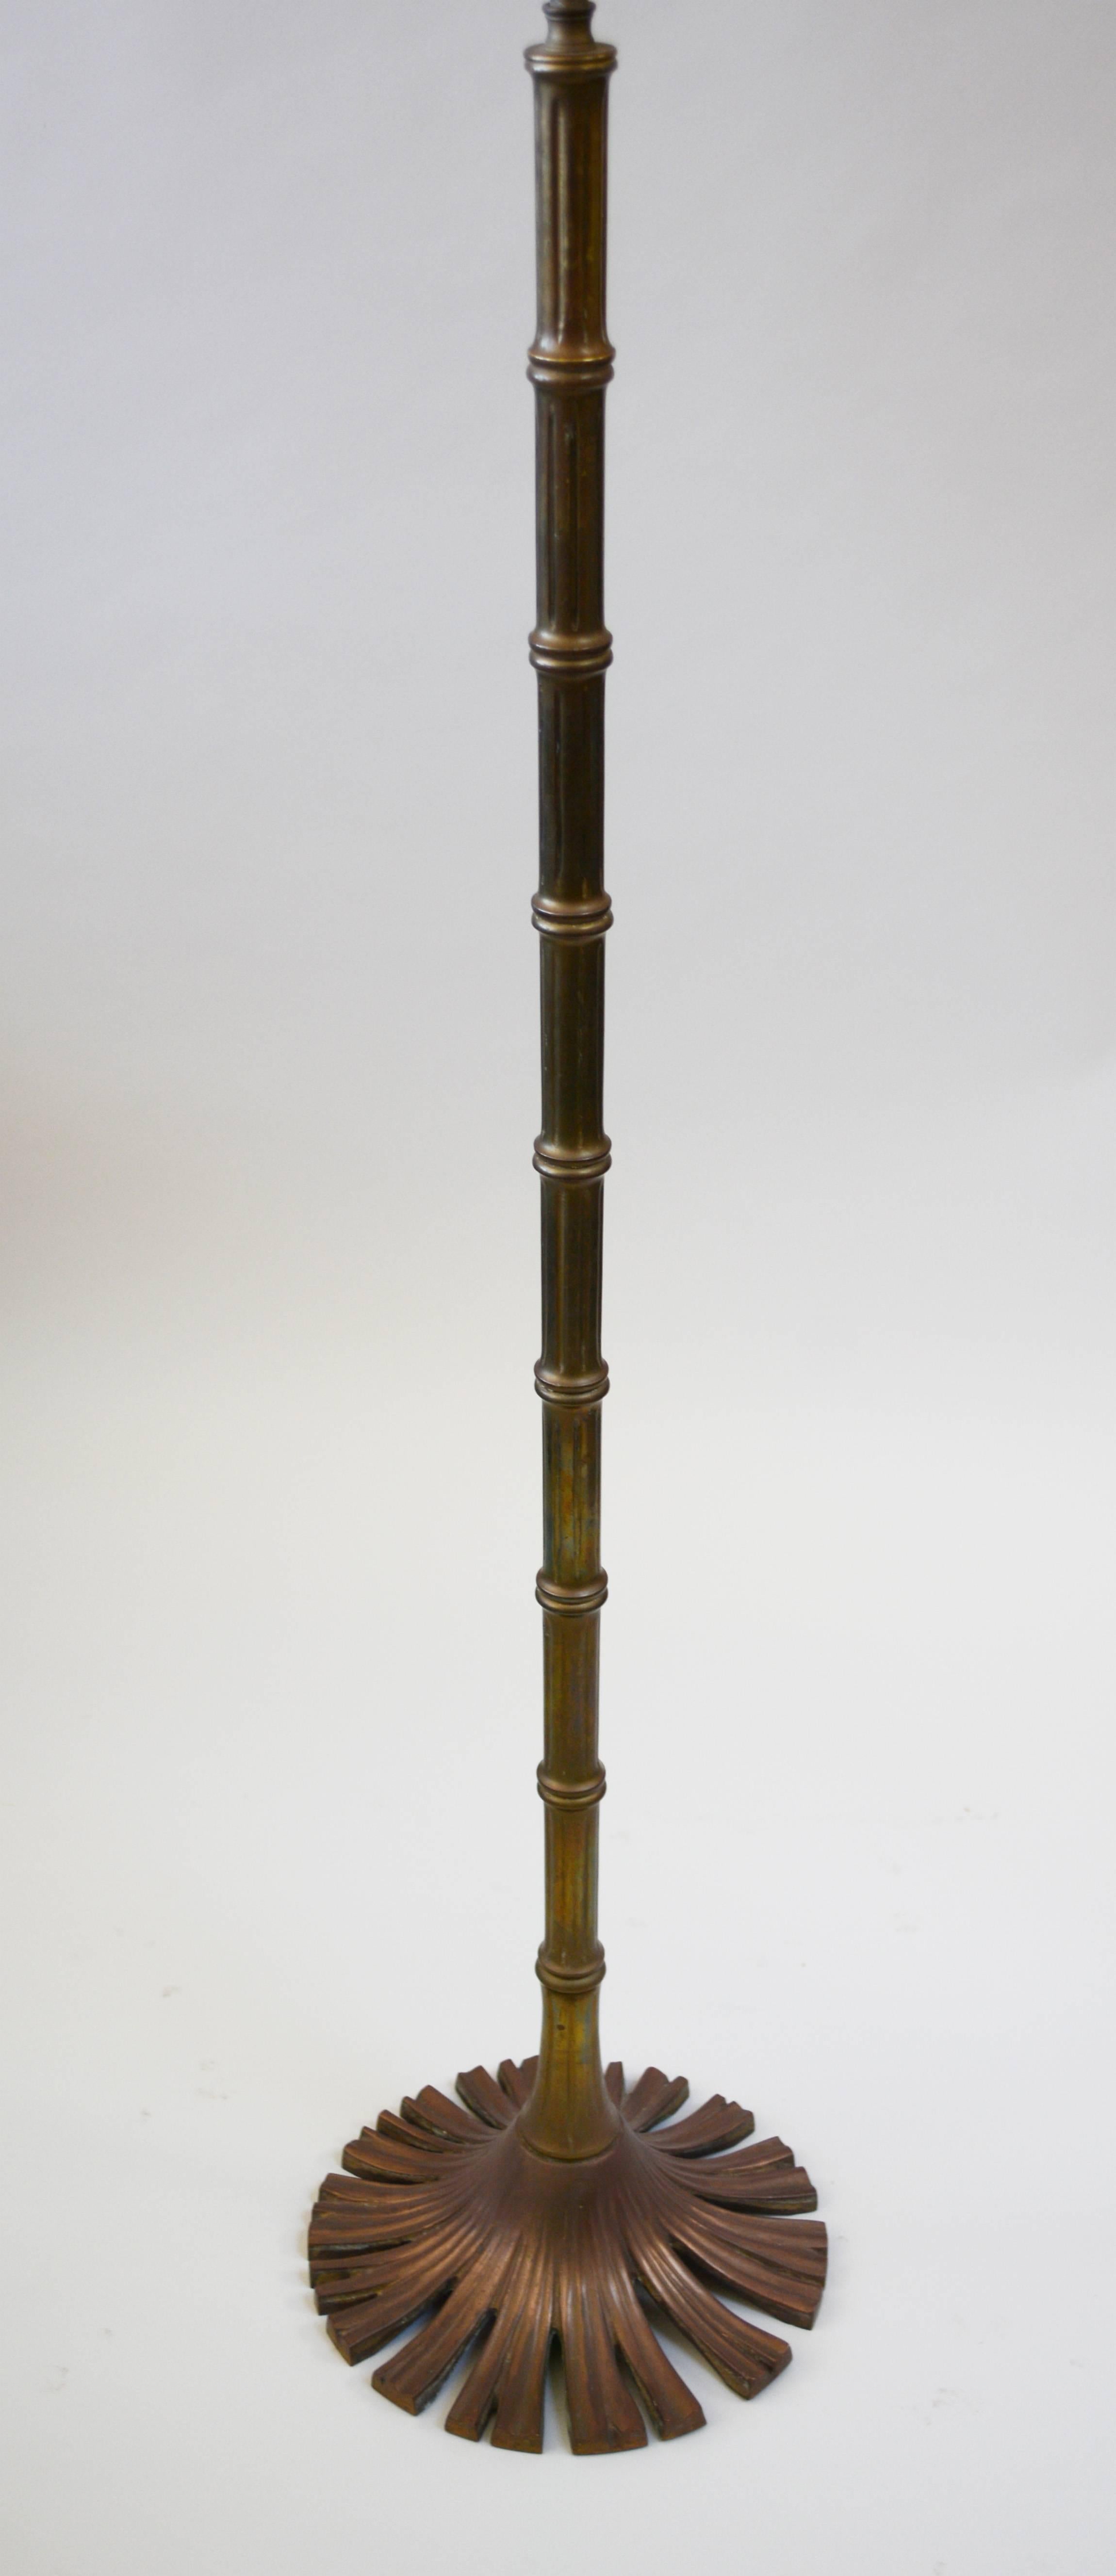 Solid brass bamboo floor lamp by Chapman. This lamp has developed a nice patina over time. 